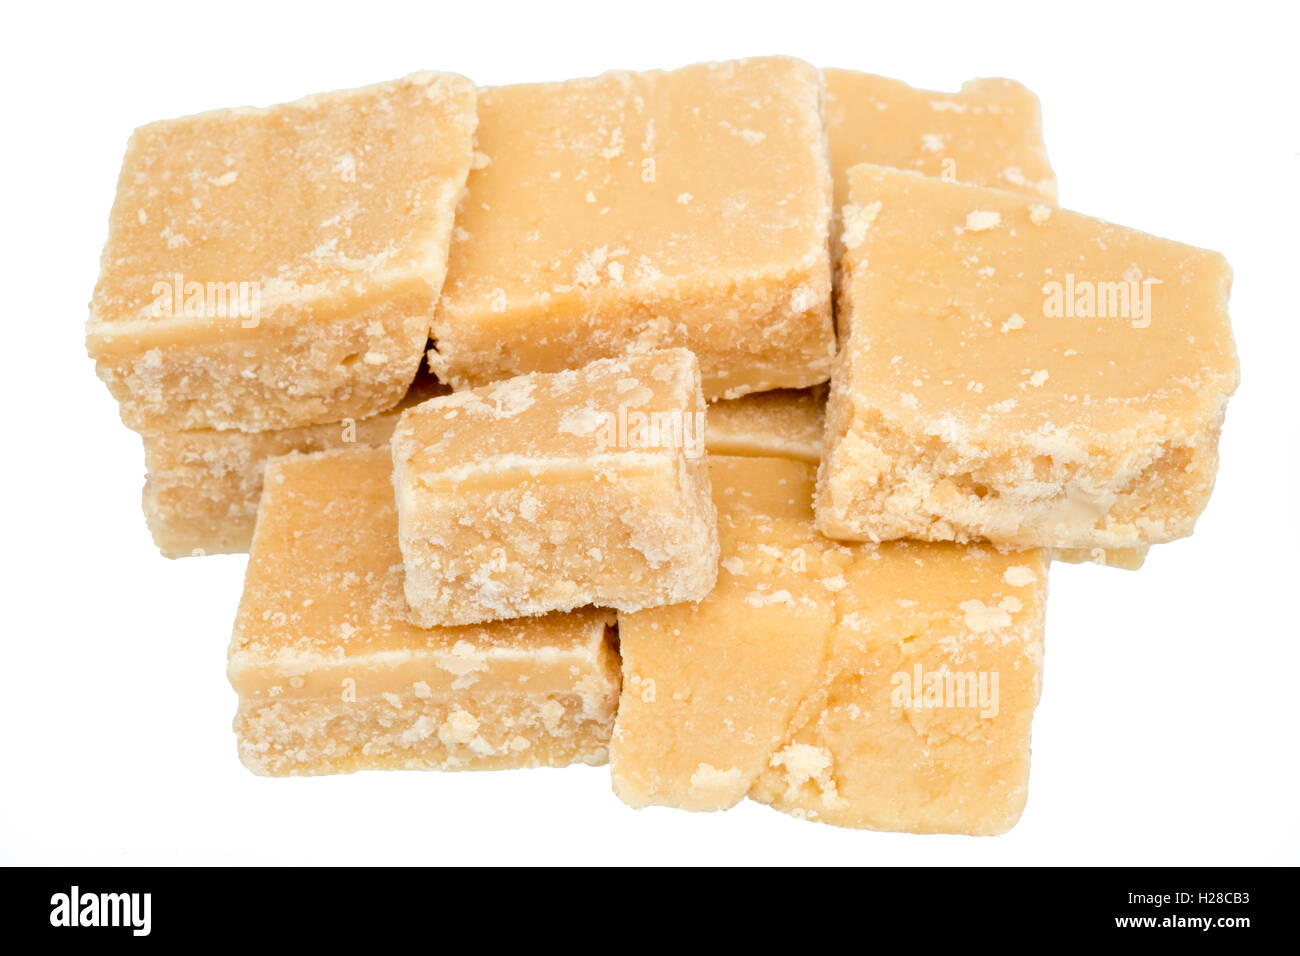 Handmade fudge pieces cut out against a white background. Stock Photo